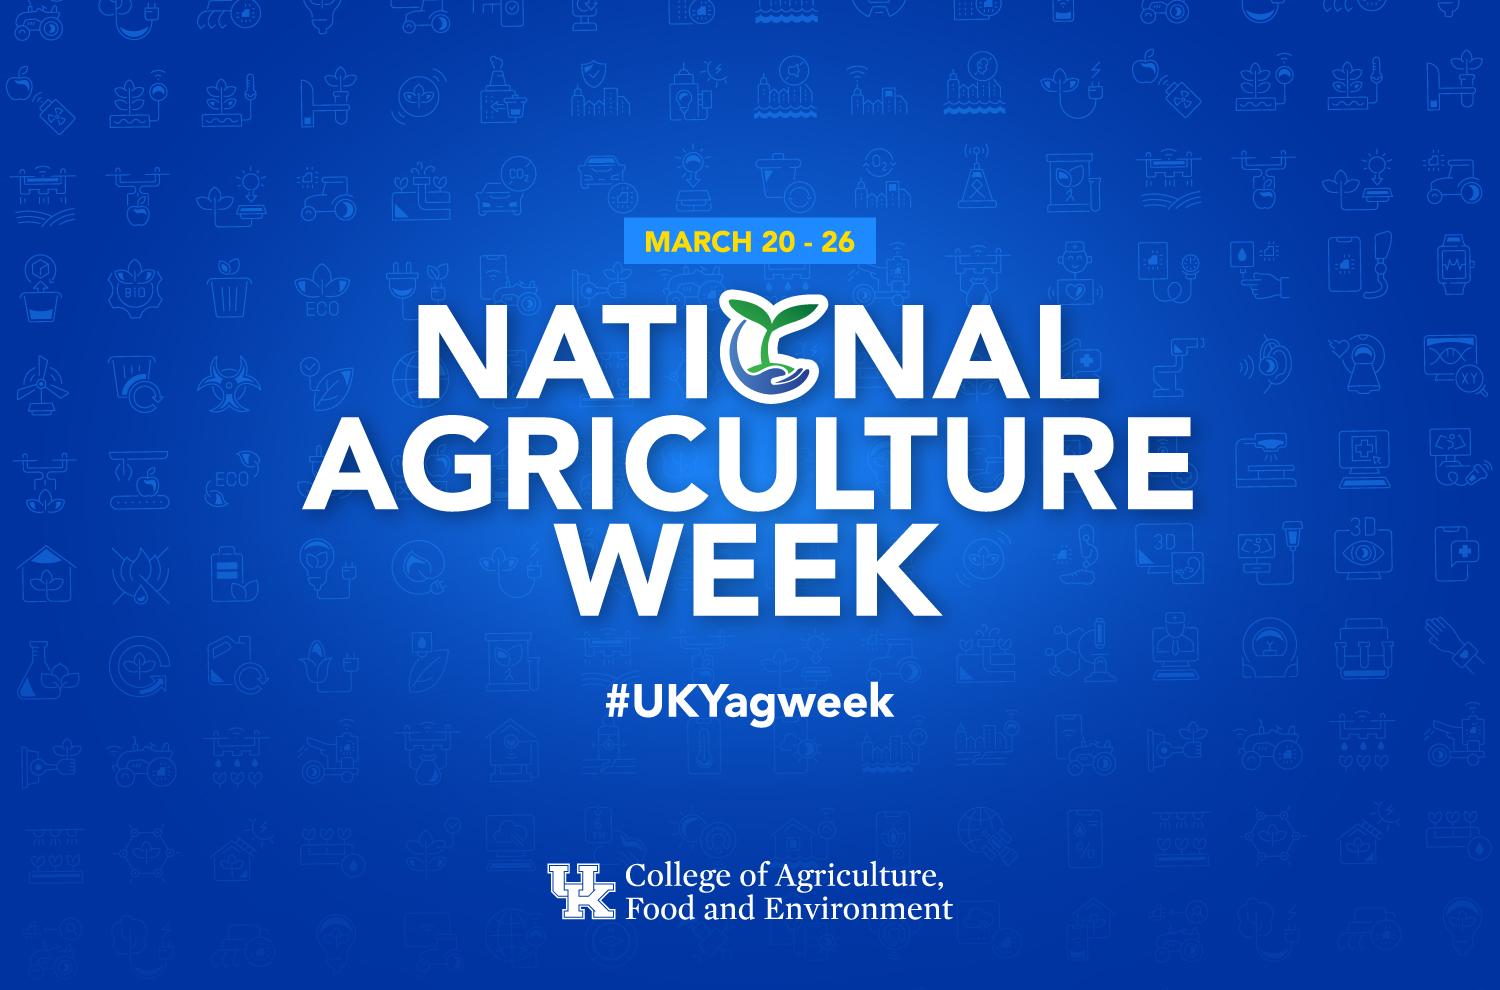 From A(gronomy) to Z(oonosis), the University of Kentucky College of Agriculture, Food and Environment is going back to basics for National Agriculture Week March 20 – 26, a celebration of agriculture.